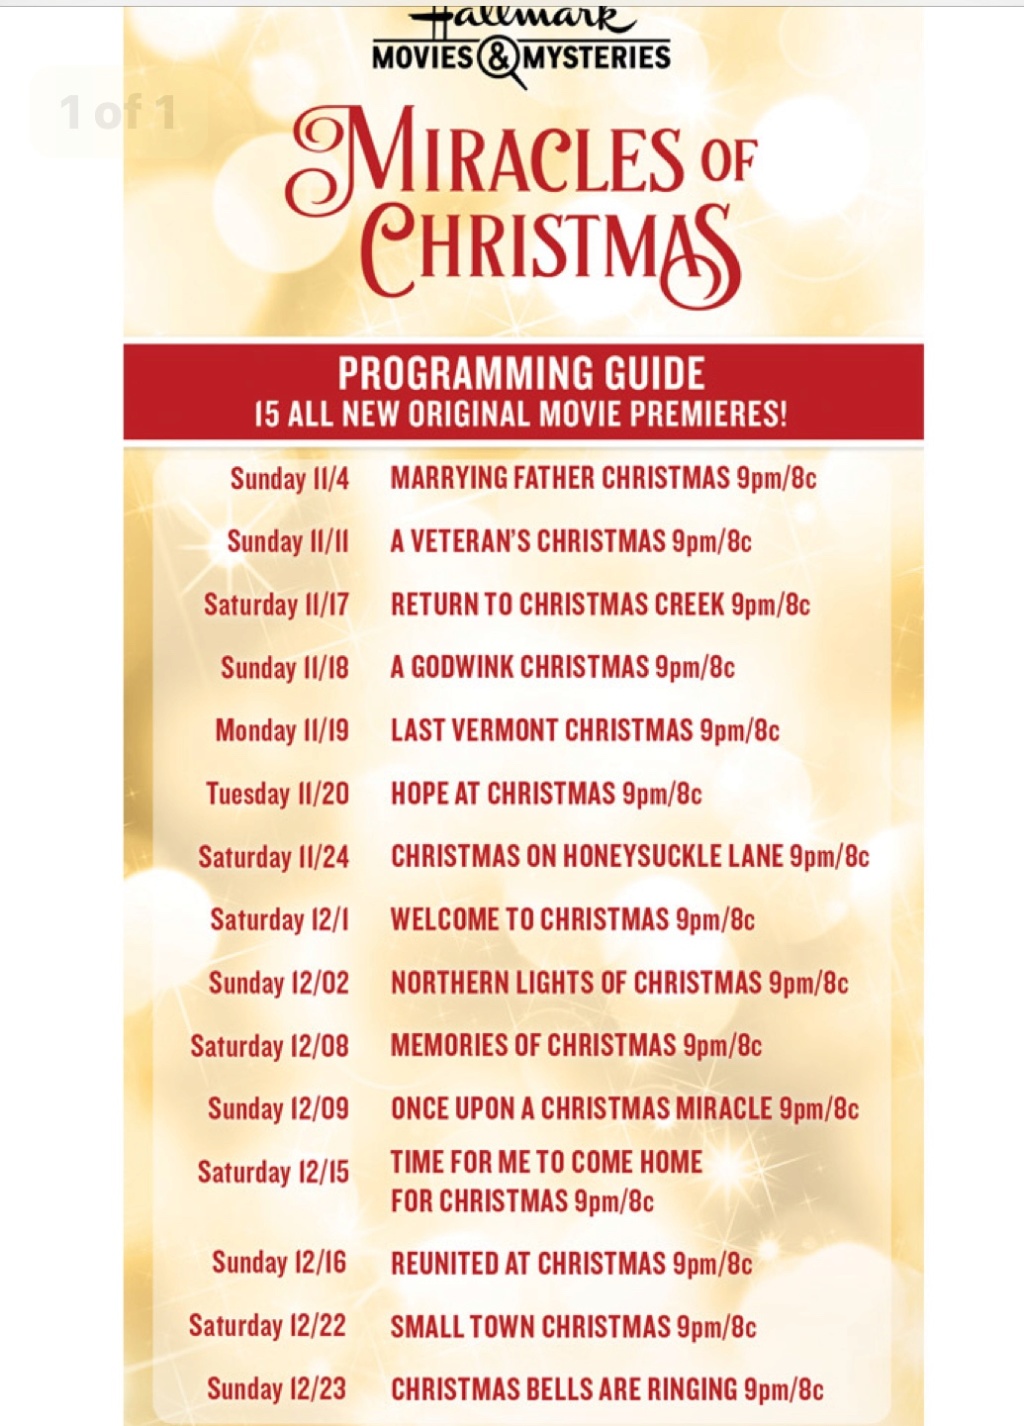 THE GUIDE FOR THIS YEAR'S HALLMARK CHRISTMAS MOVIES Dc53c510